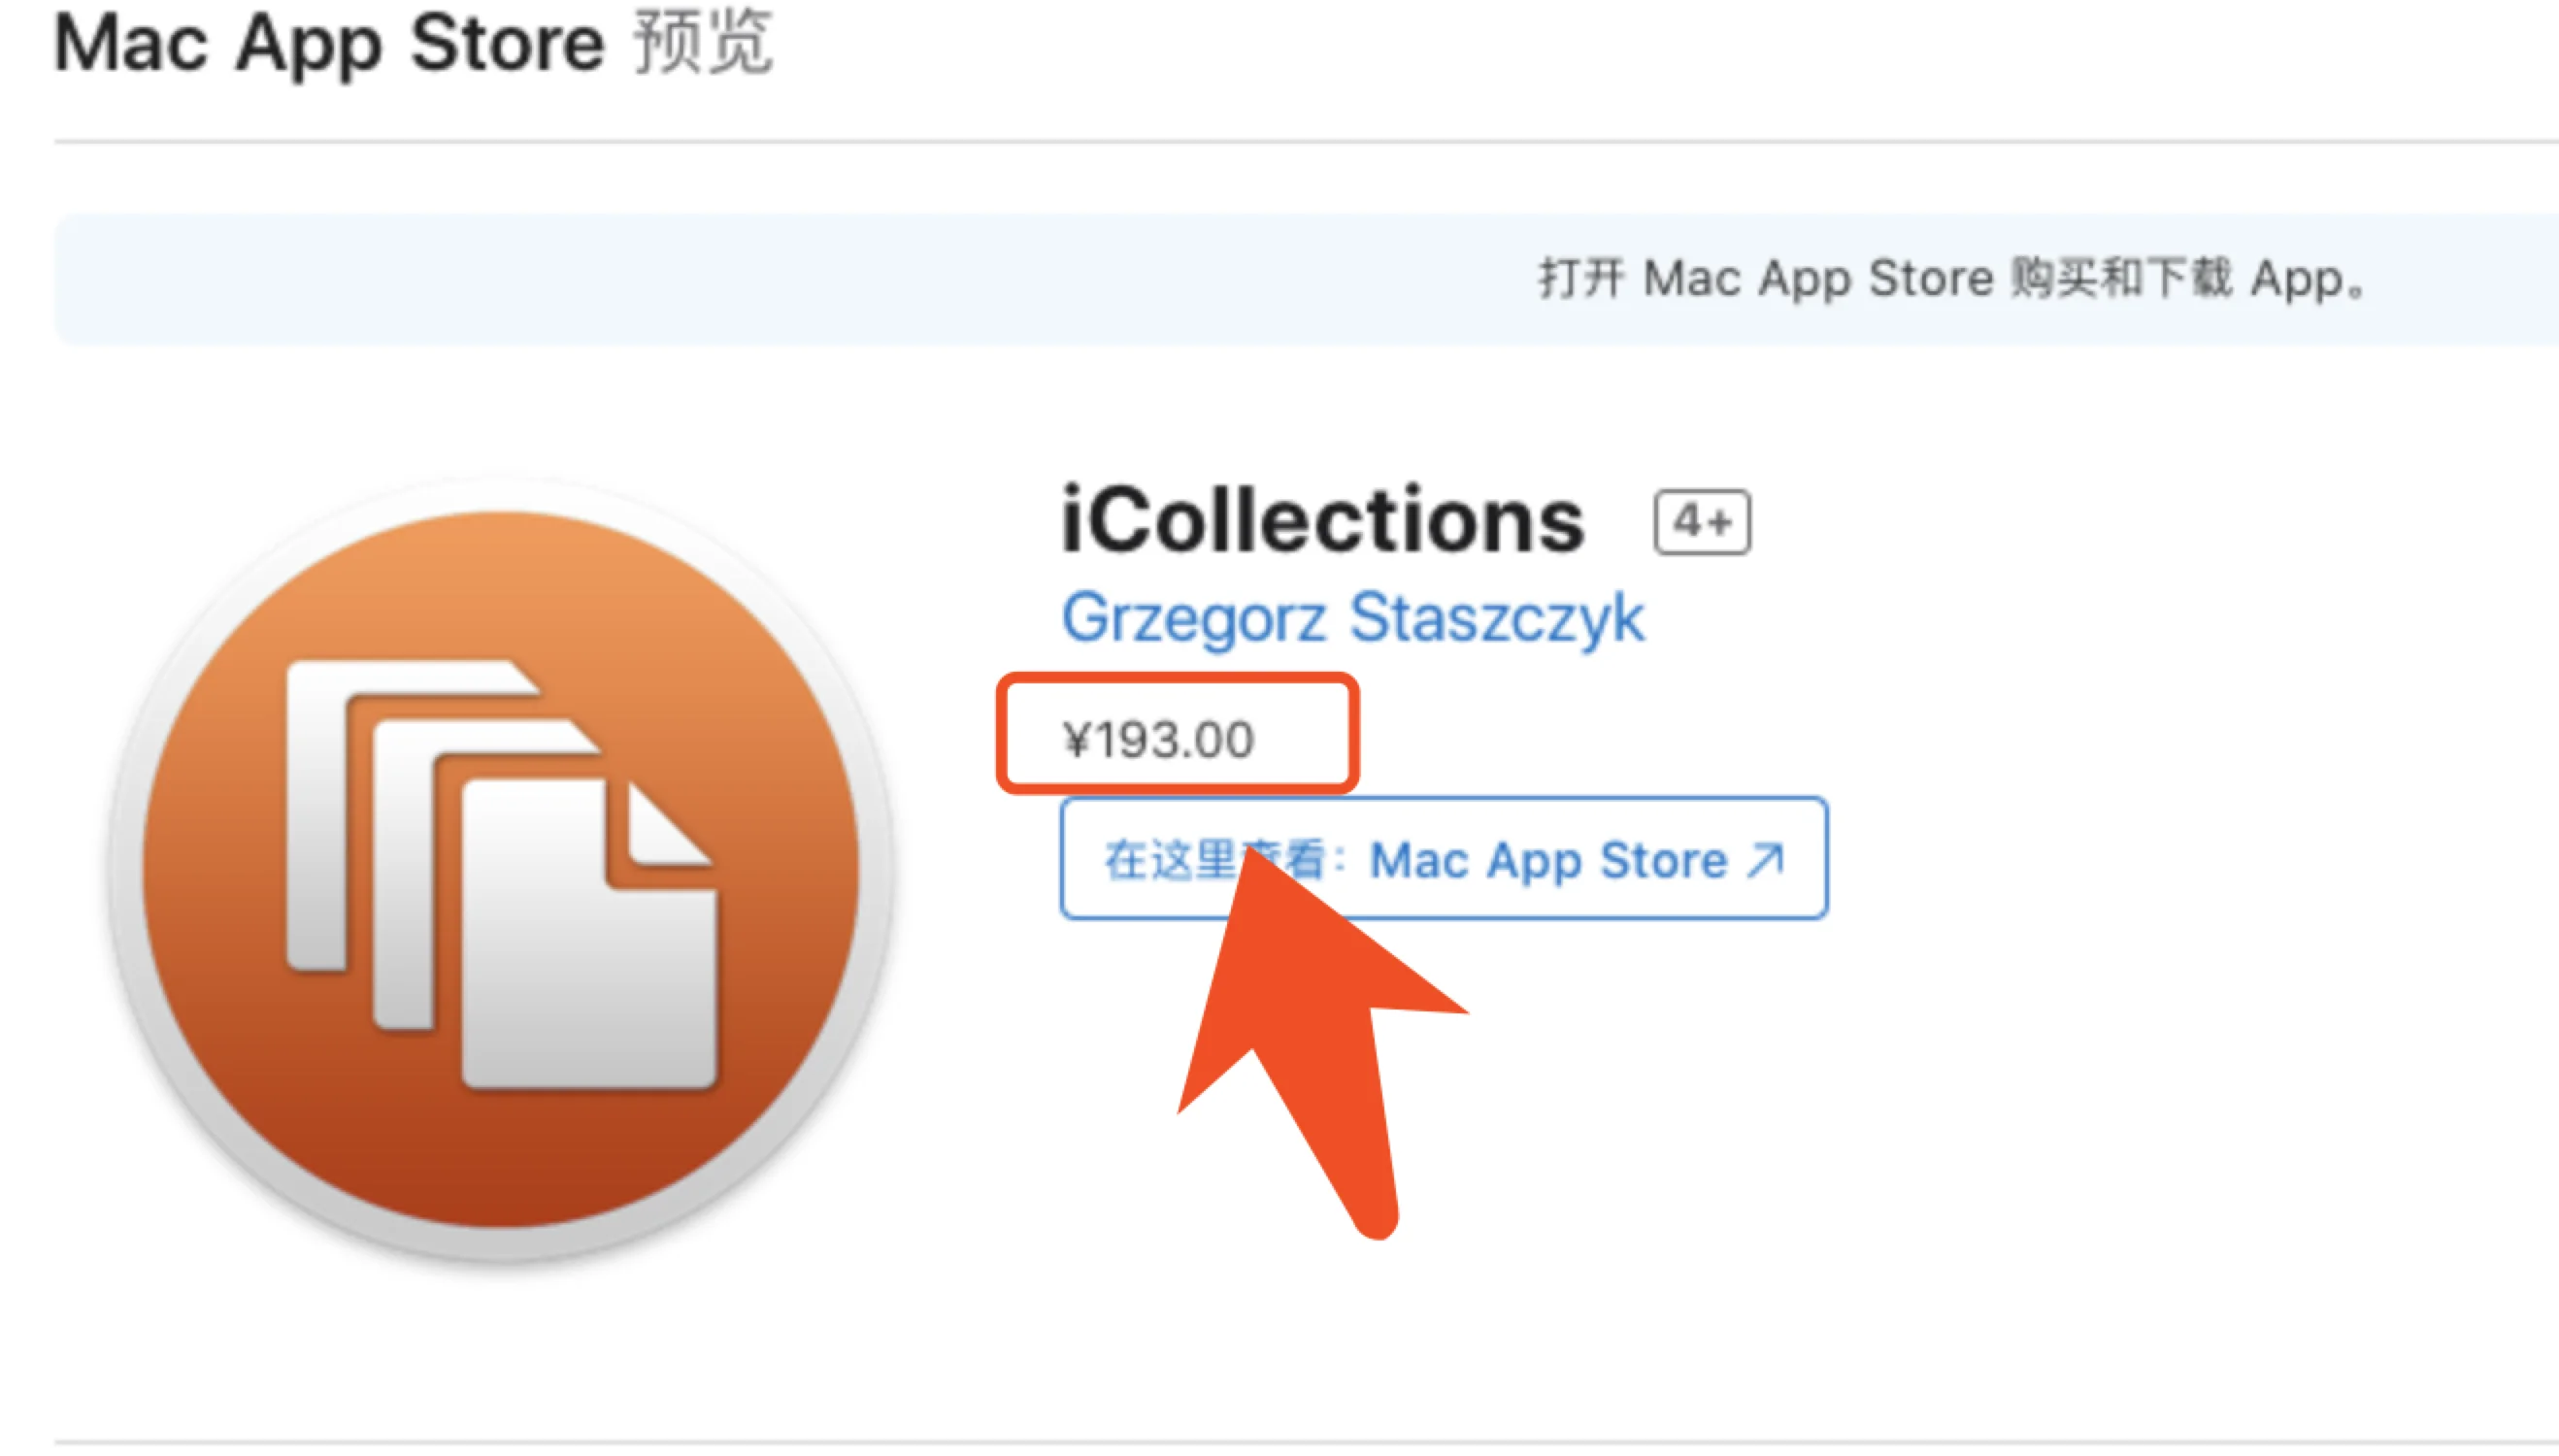 iCollections 6.3.3 (63311) 组织你的桌面图标-马克喵